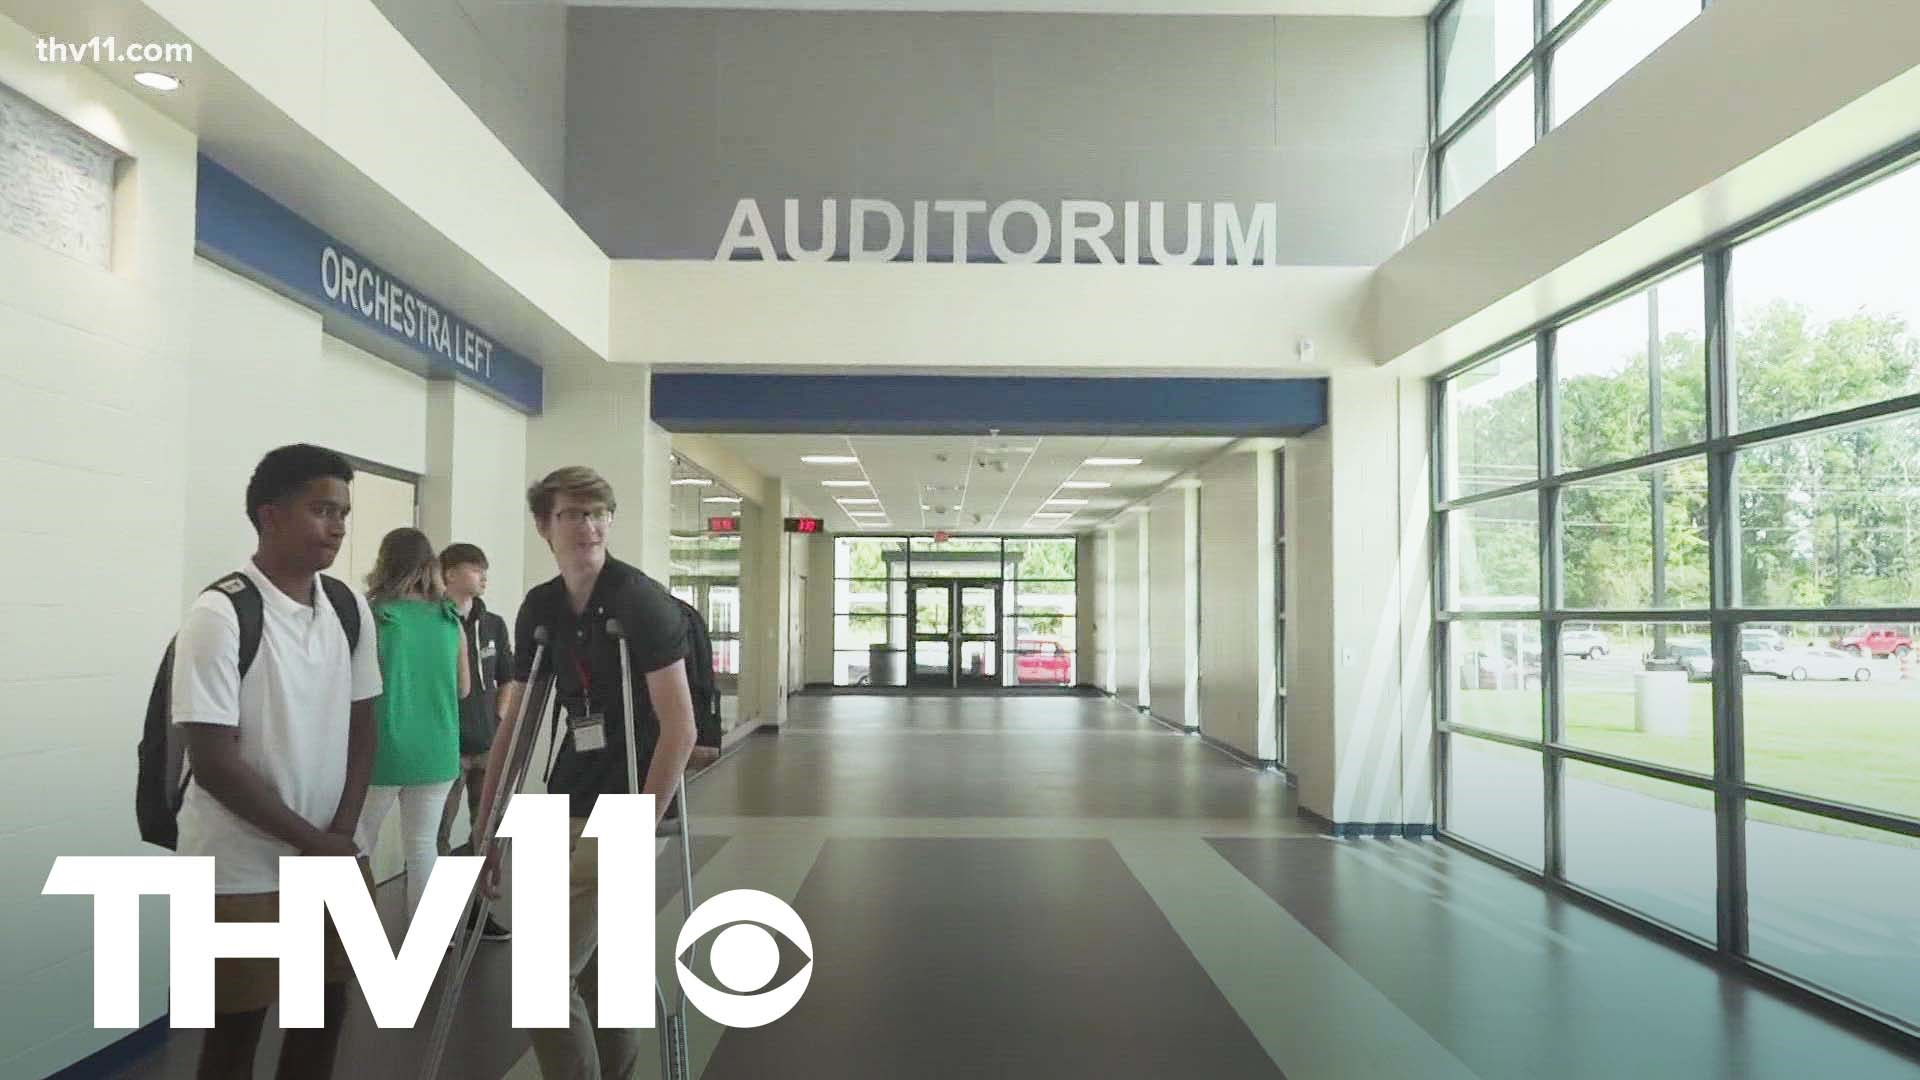 Students and staff walked through the halls of the new school building for the first time on Thursday.